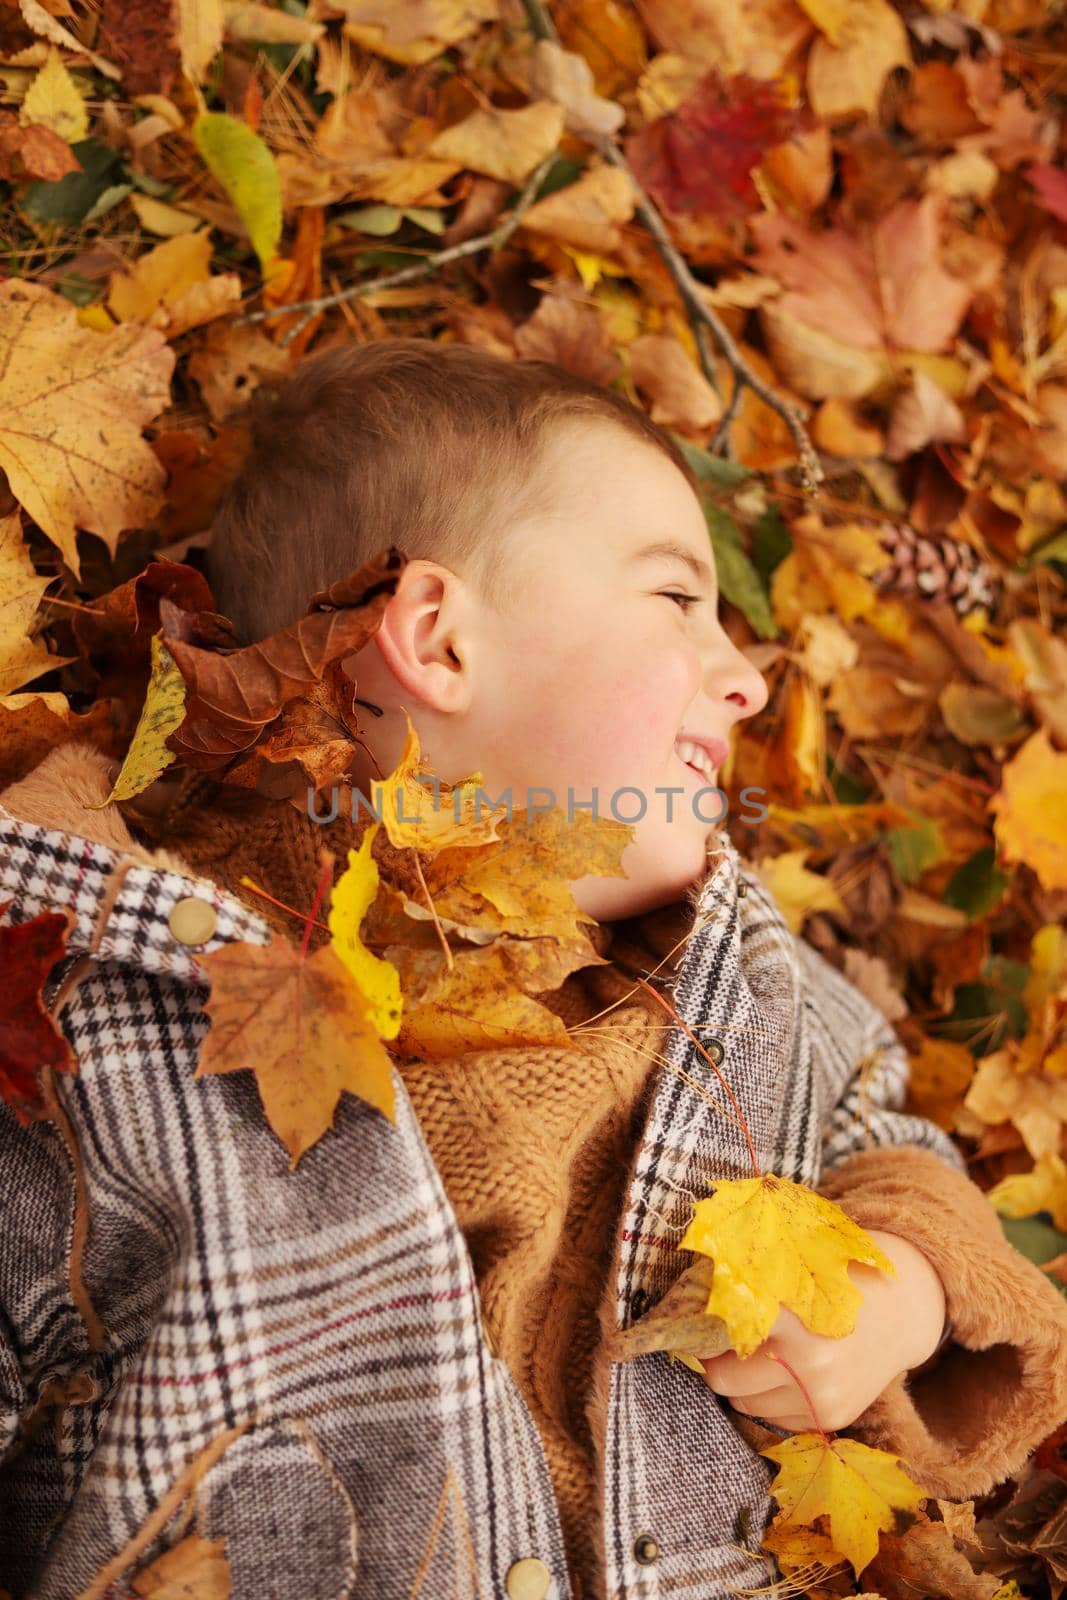 Outdoor fun in autumn. Child playing with autumn fallen leaves in park. Happy little boy lying down on yellow leaves outdoors. View from above